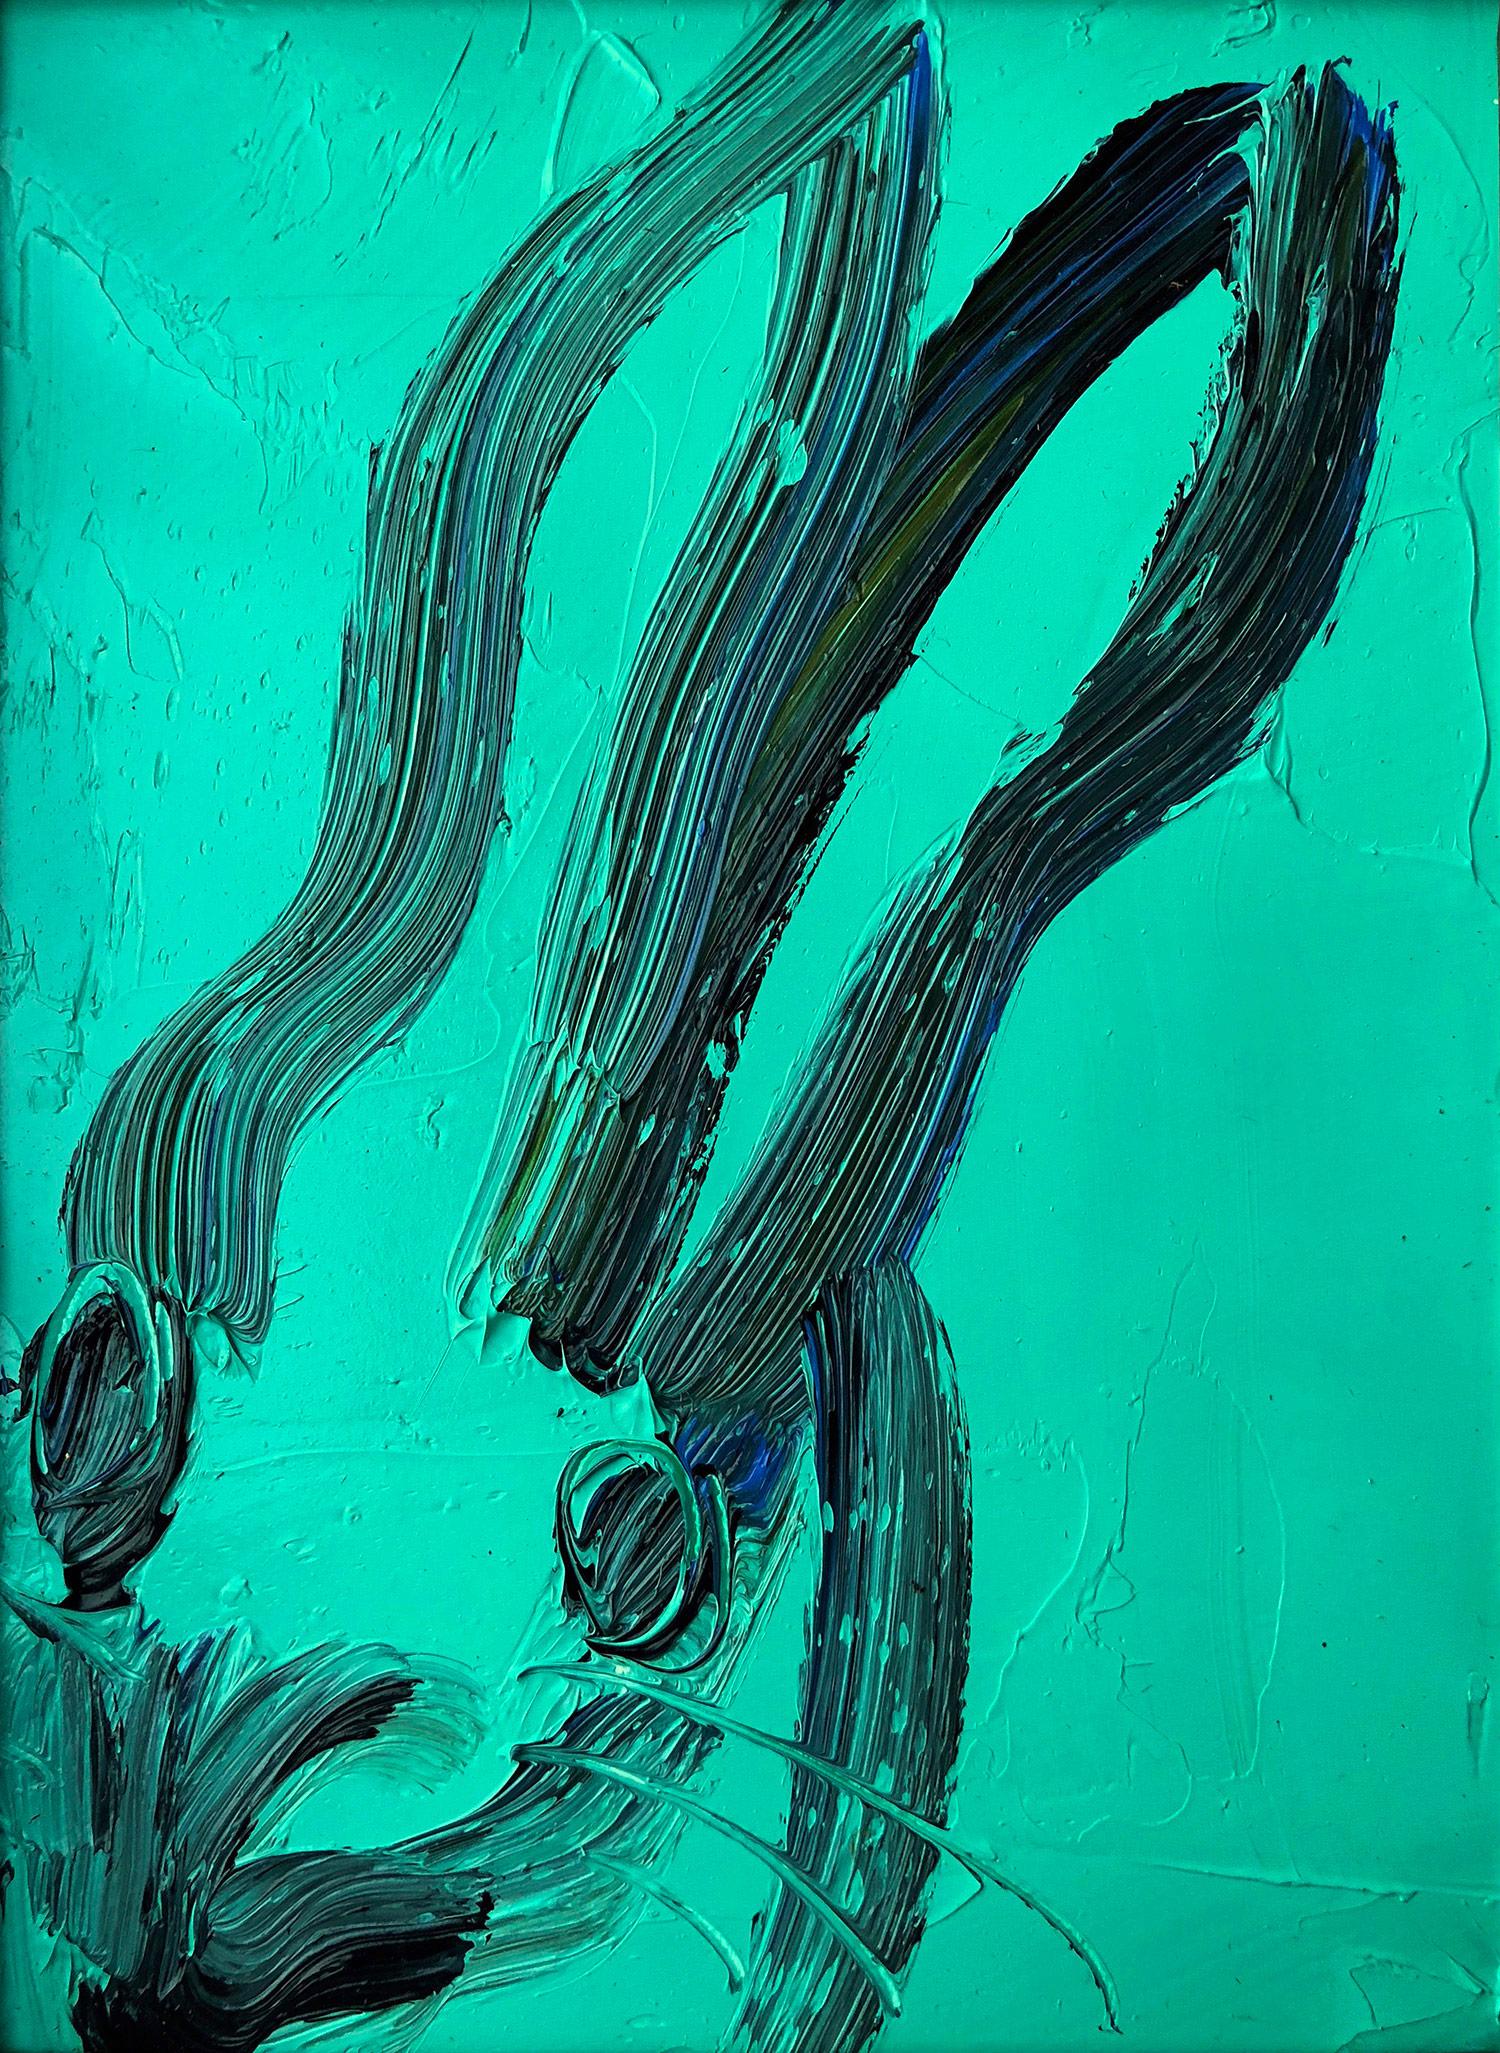 Untitled (Bunny on Cadet Turquoise) - Painting by Hunt Slonem